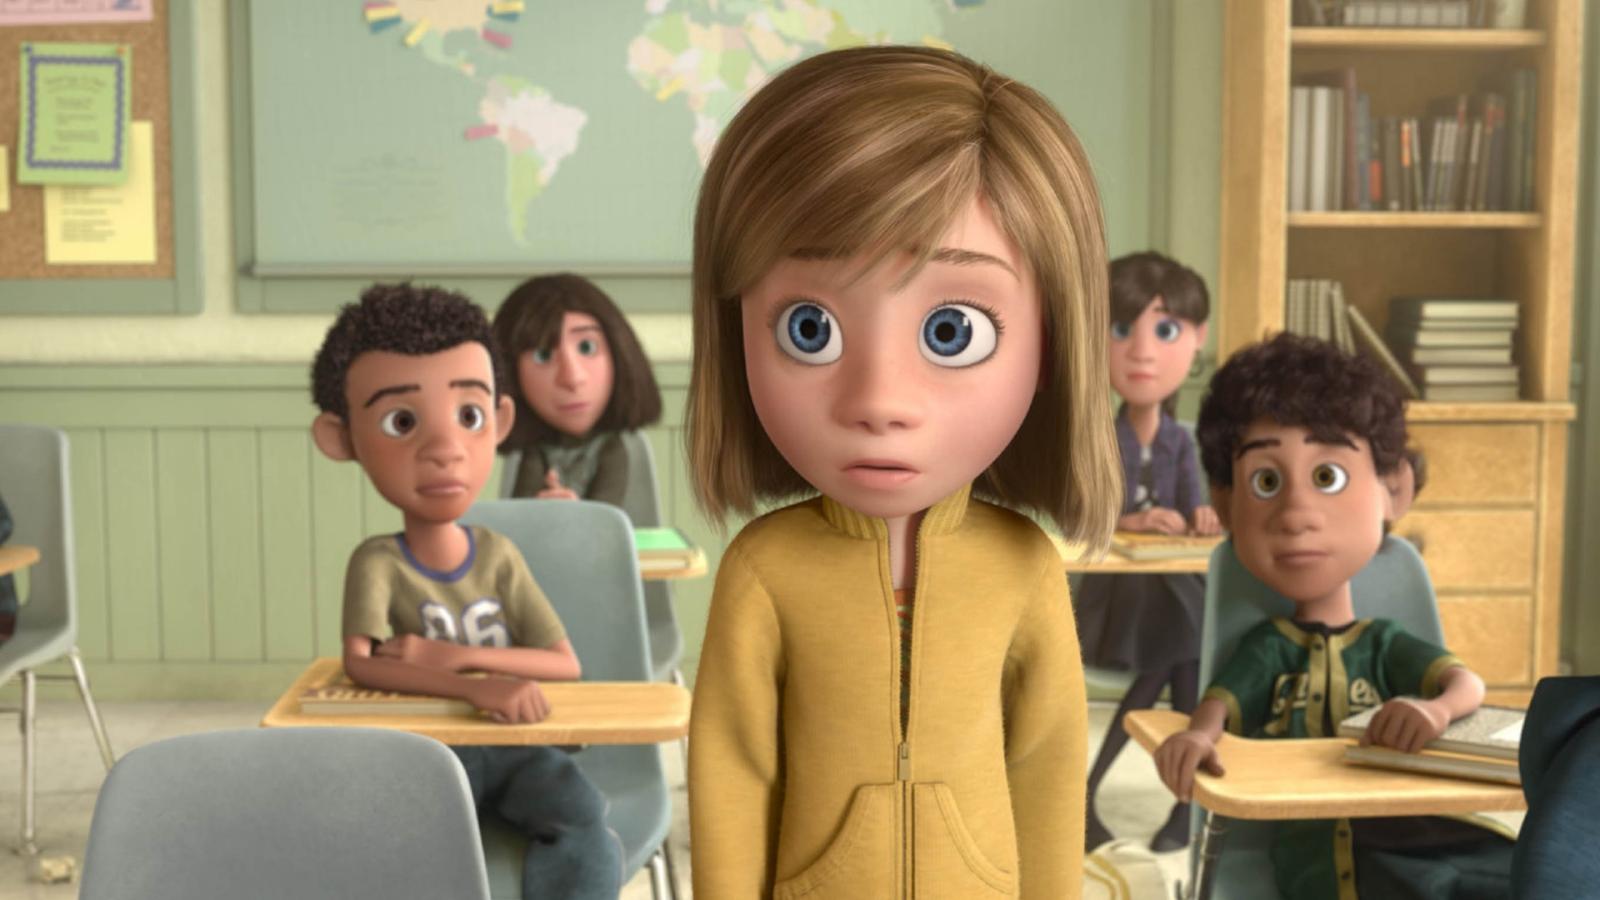 15 Animated Films That Adults Love More Than Kids - image 11